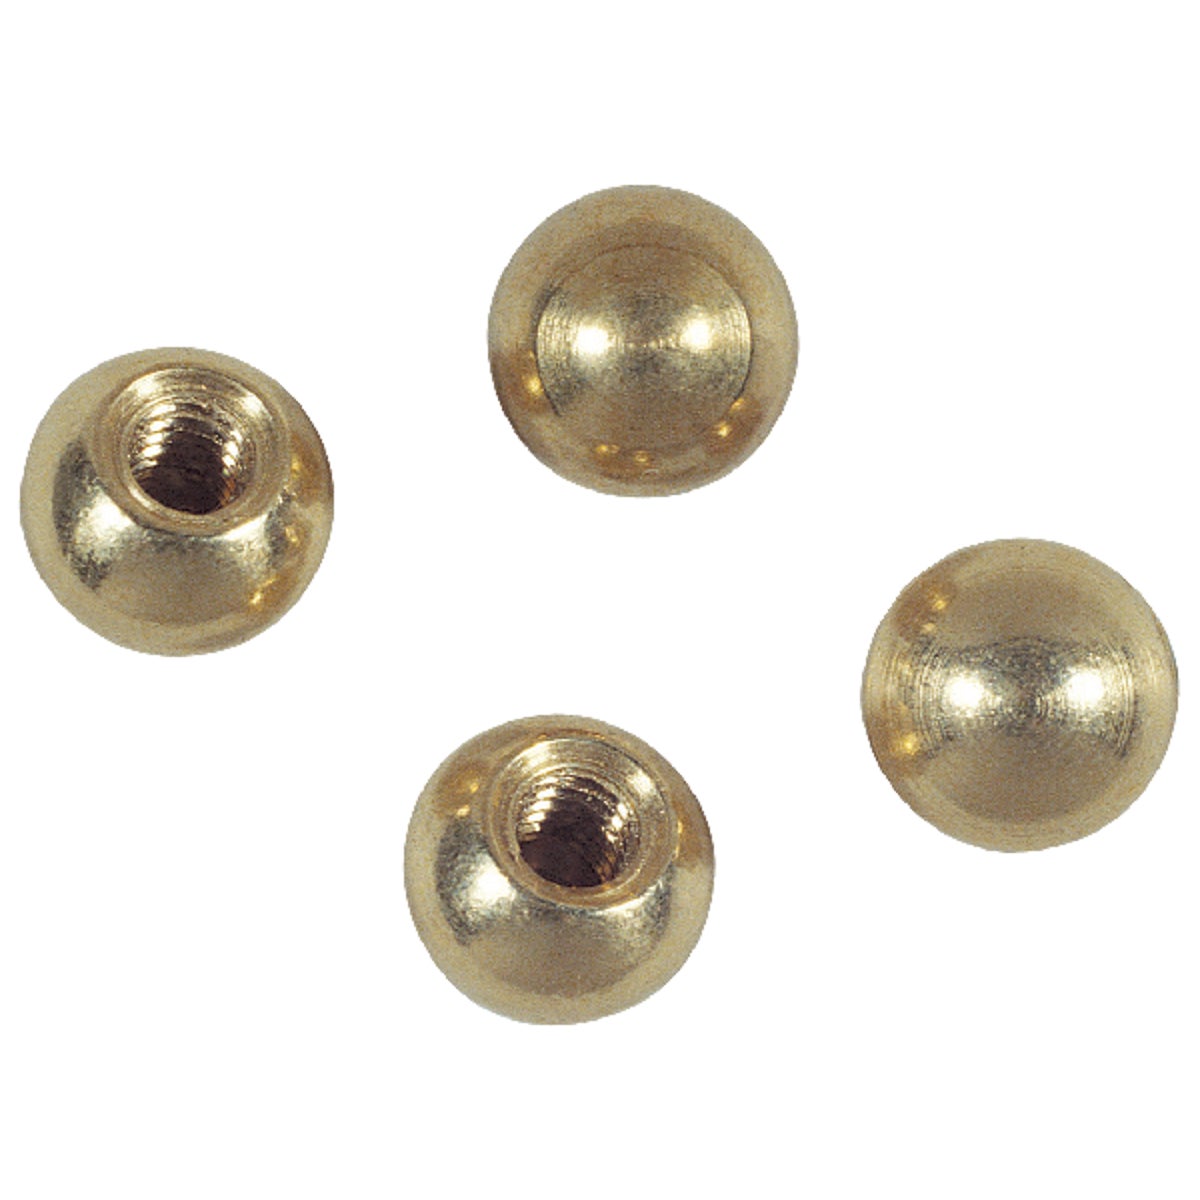 Item 507415, Solid brass lamp replacement ball nut. 3/8-inch diameter.